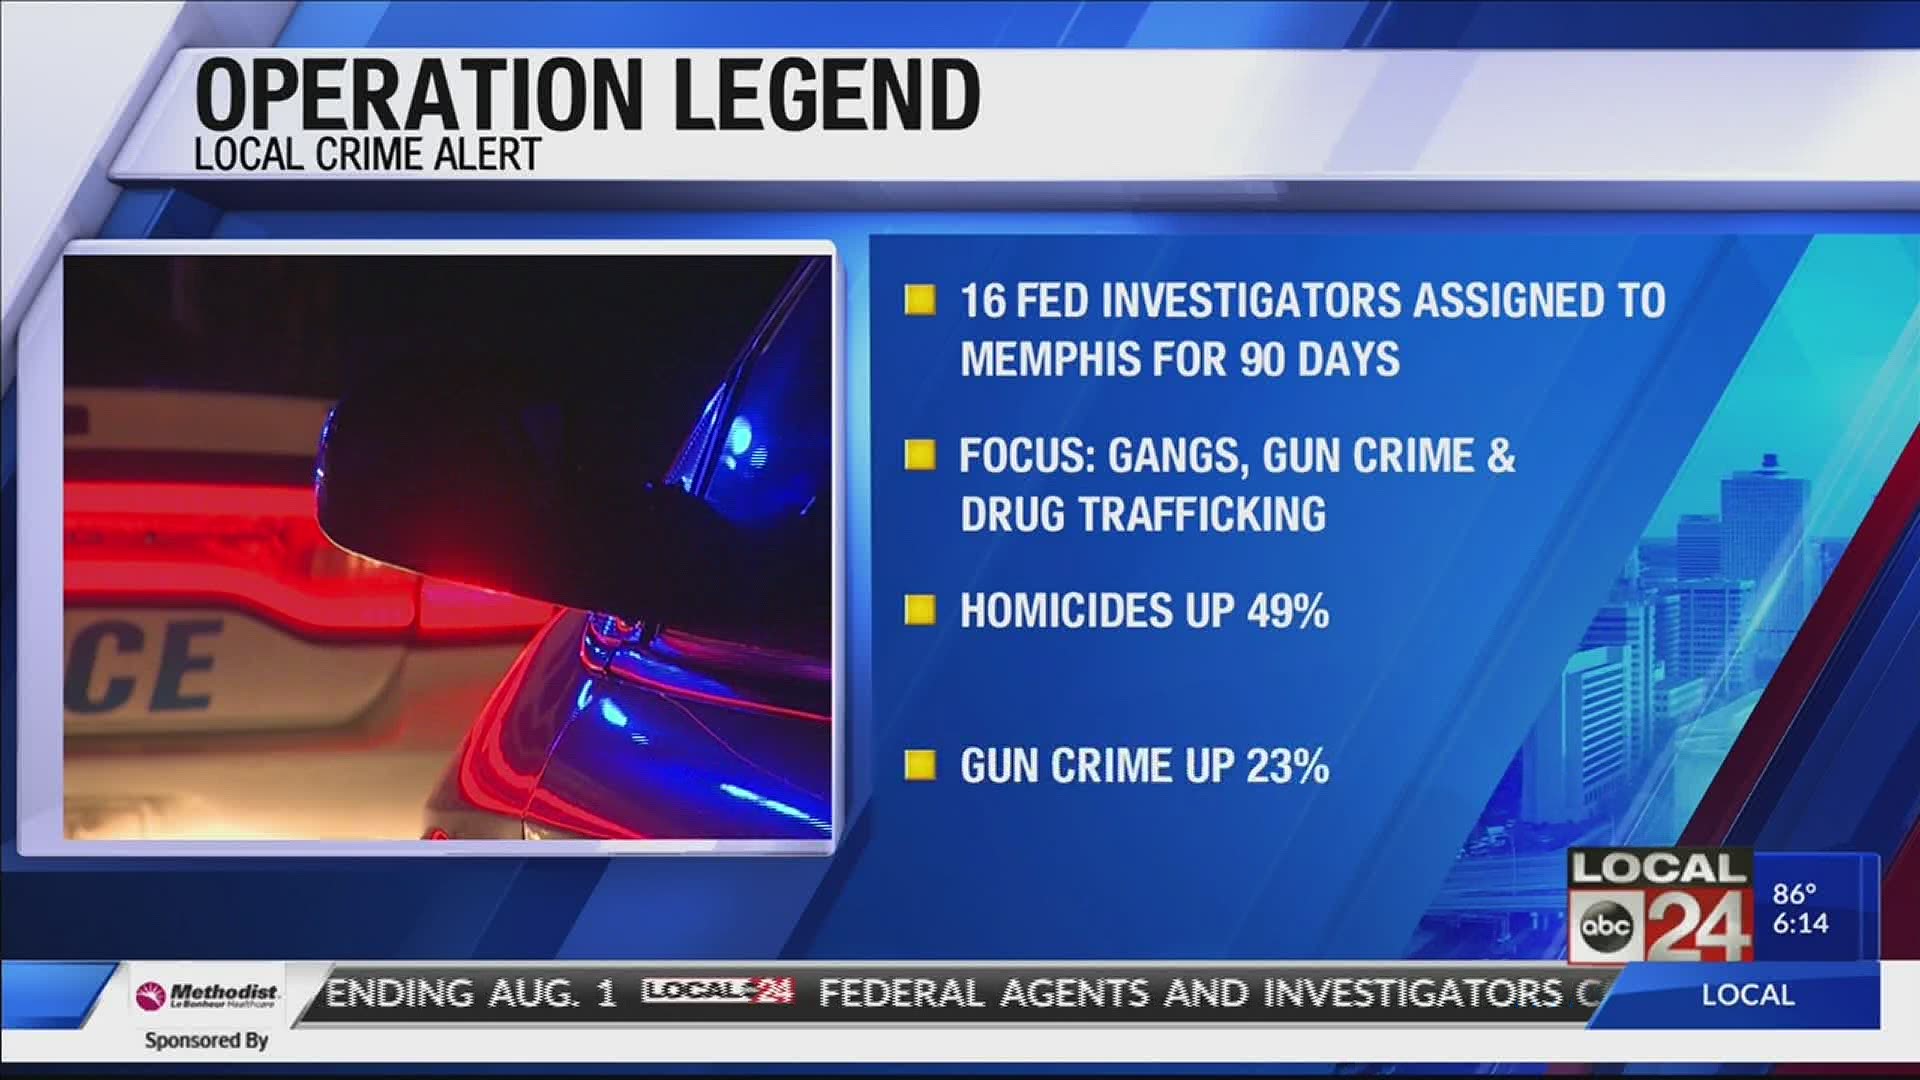 In Memphis, homicides are up more than 49%, gun crime up 23%, and aggravated assault shootings up over 19% over 2019.